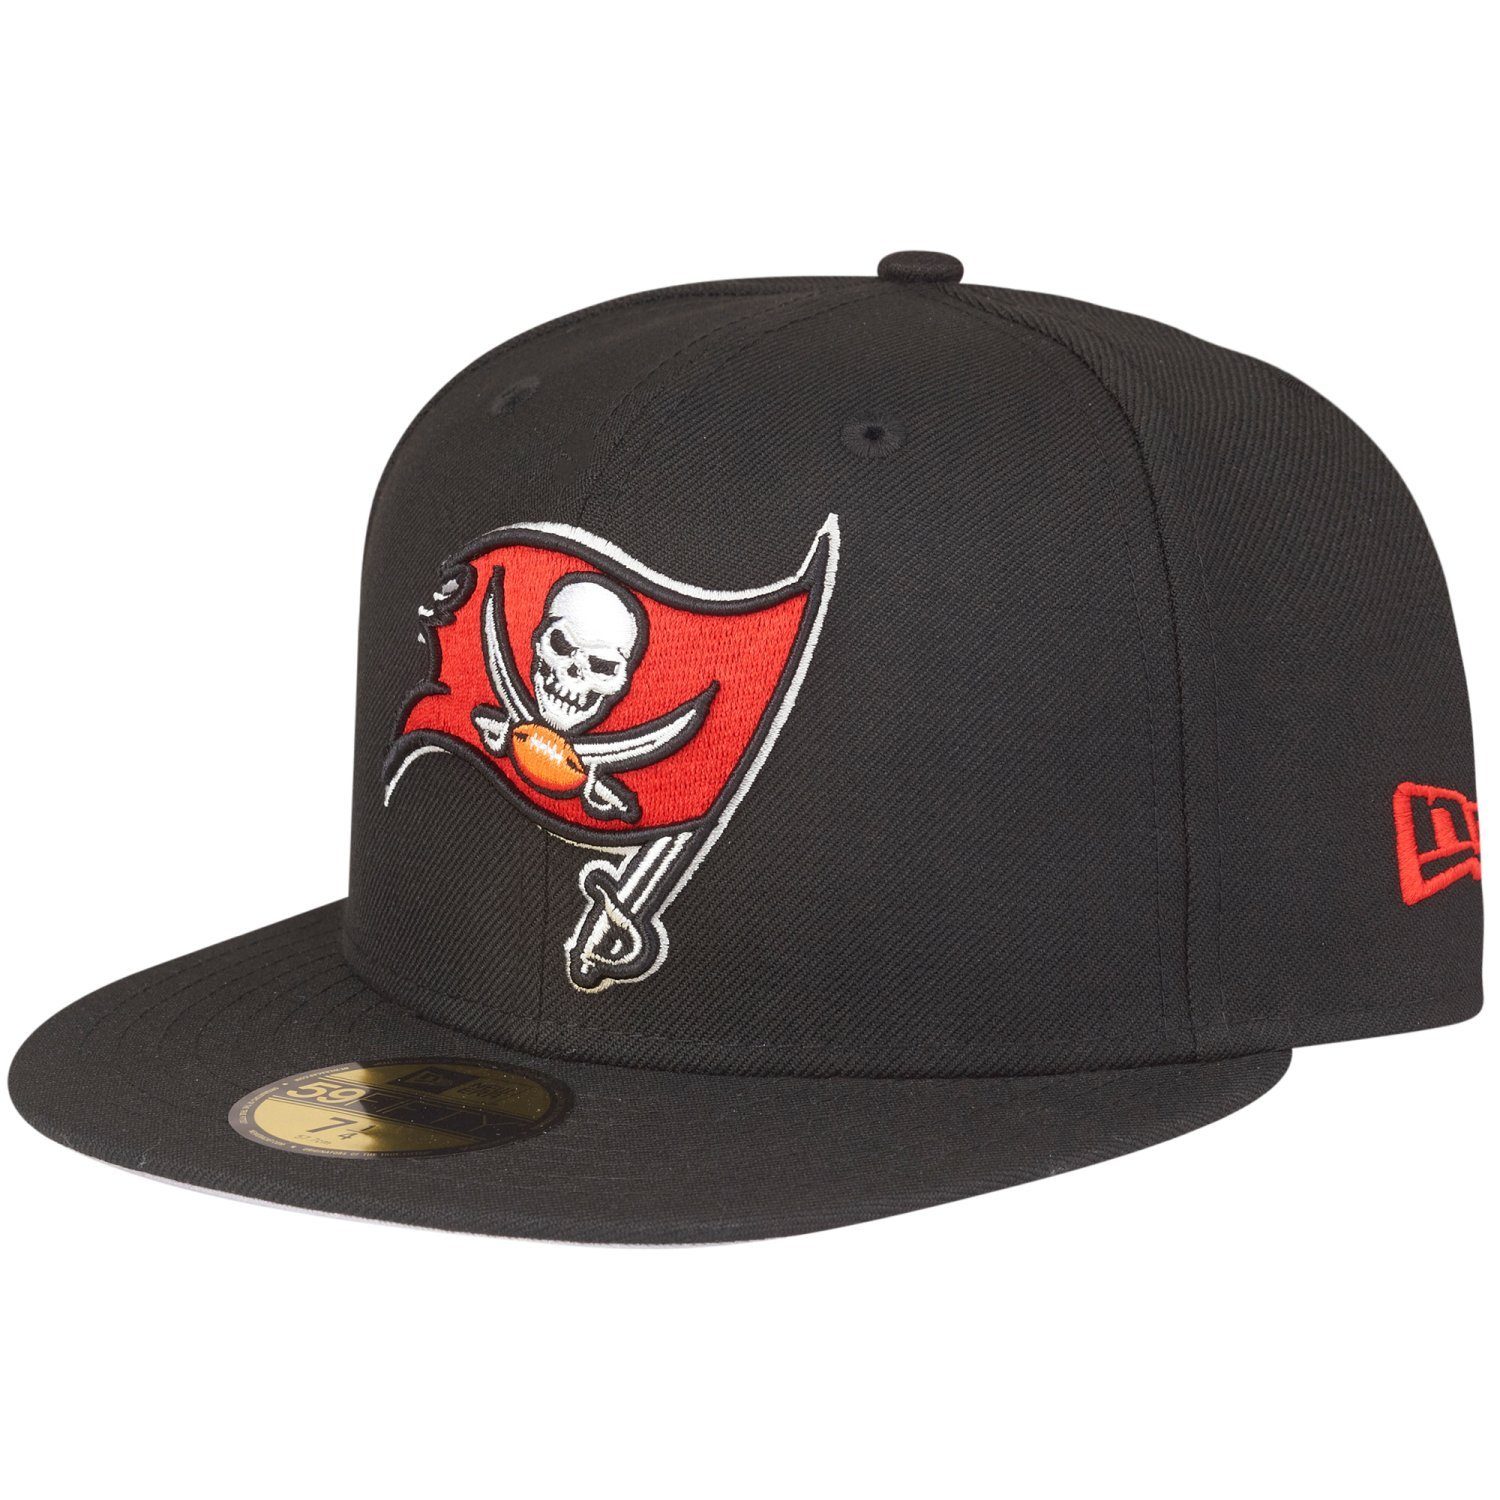 New Era Fitted Cap 59Fifty Bay Buccaneers NFL Tampa